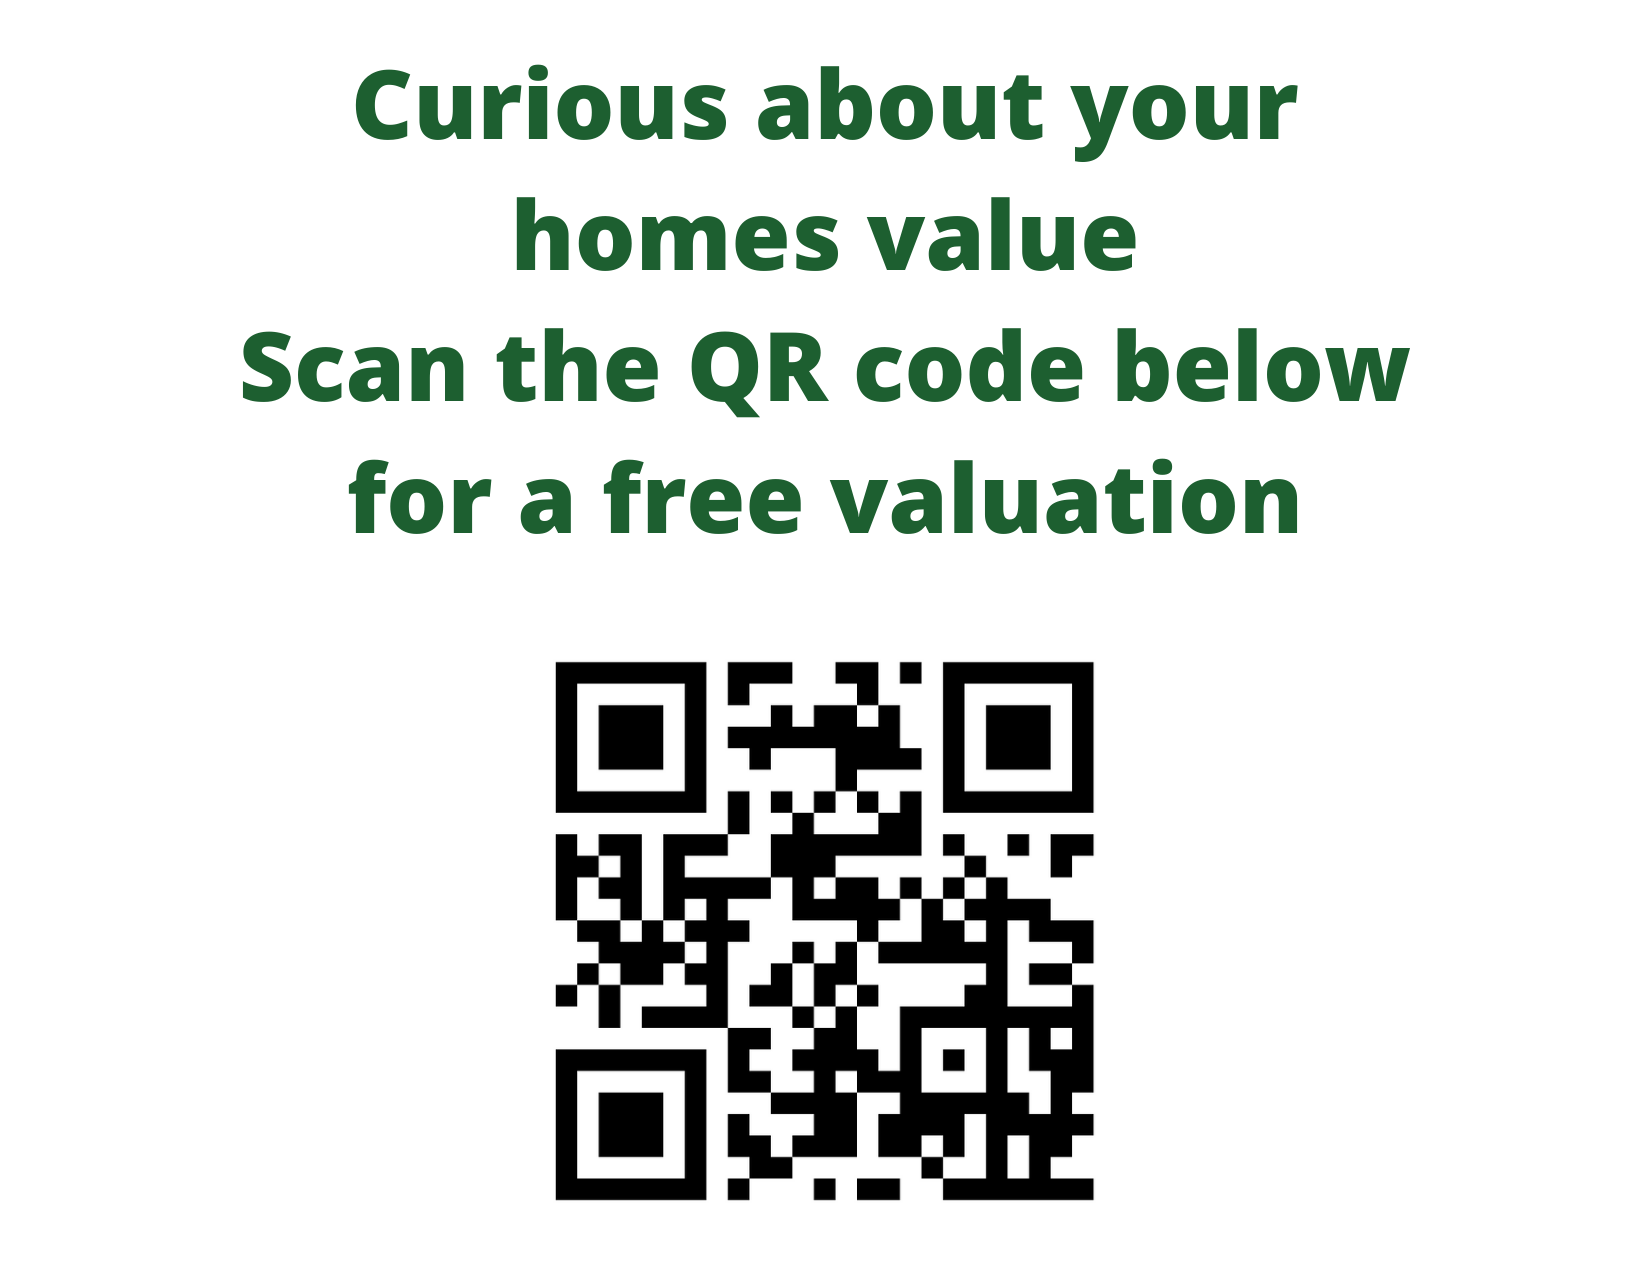 FInd out your homes value?